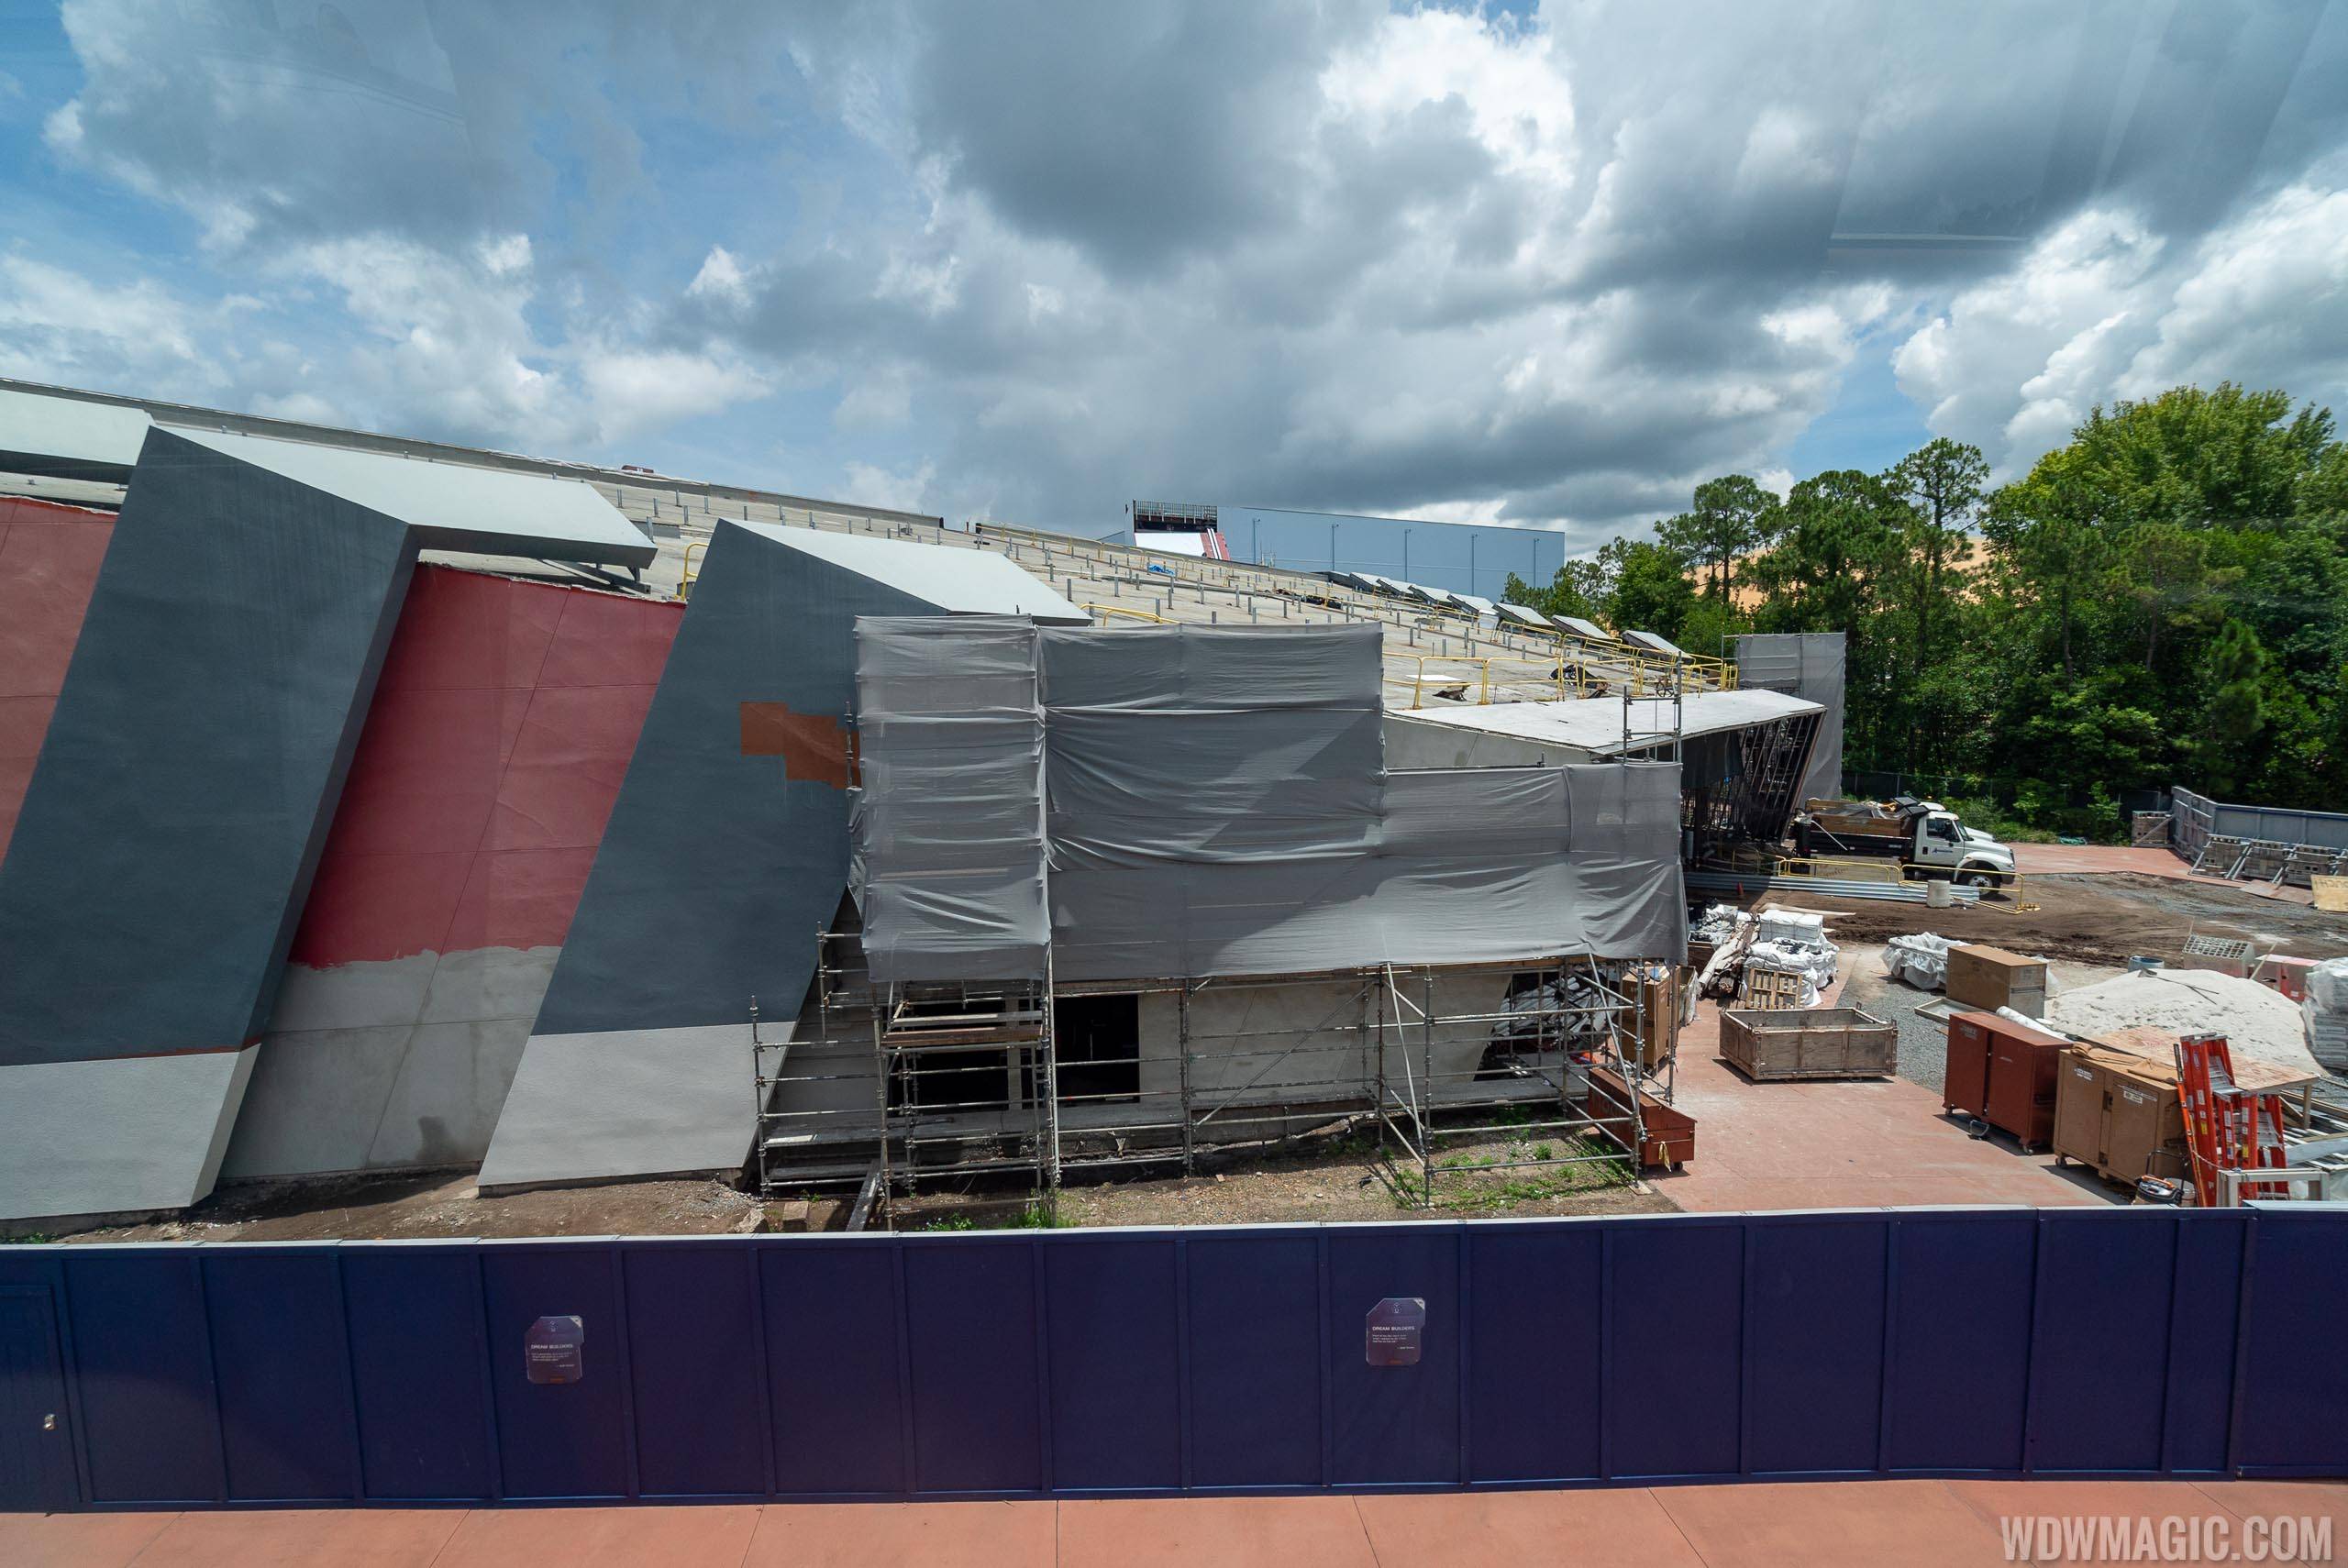 Guardians of the Galaxy construction from inside park - July 2019